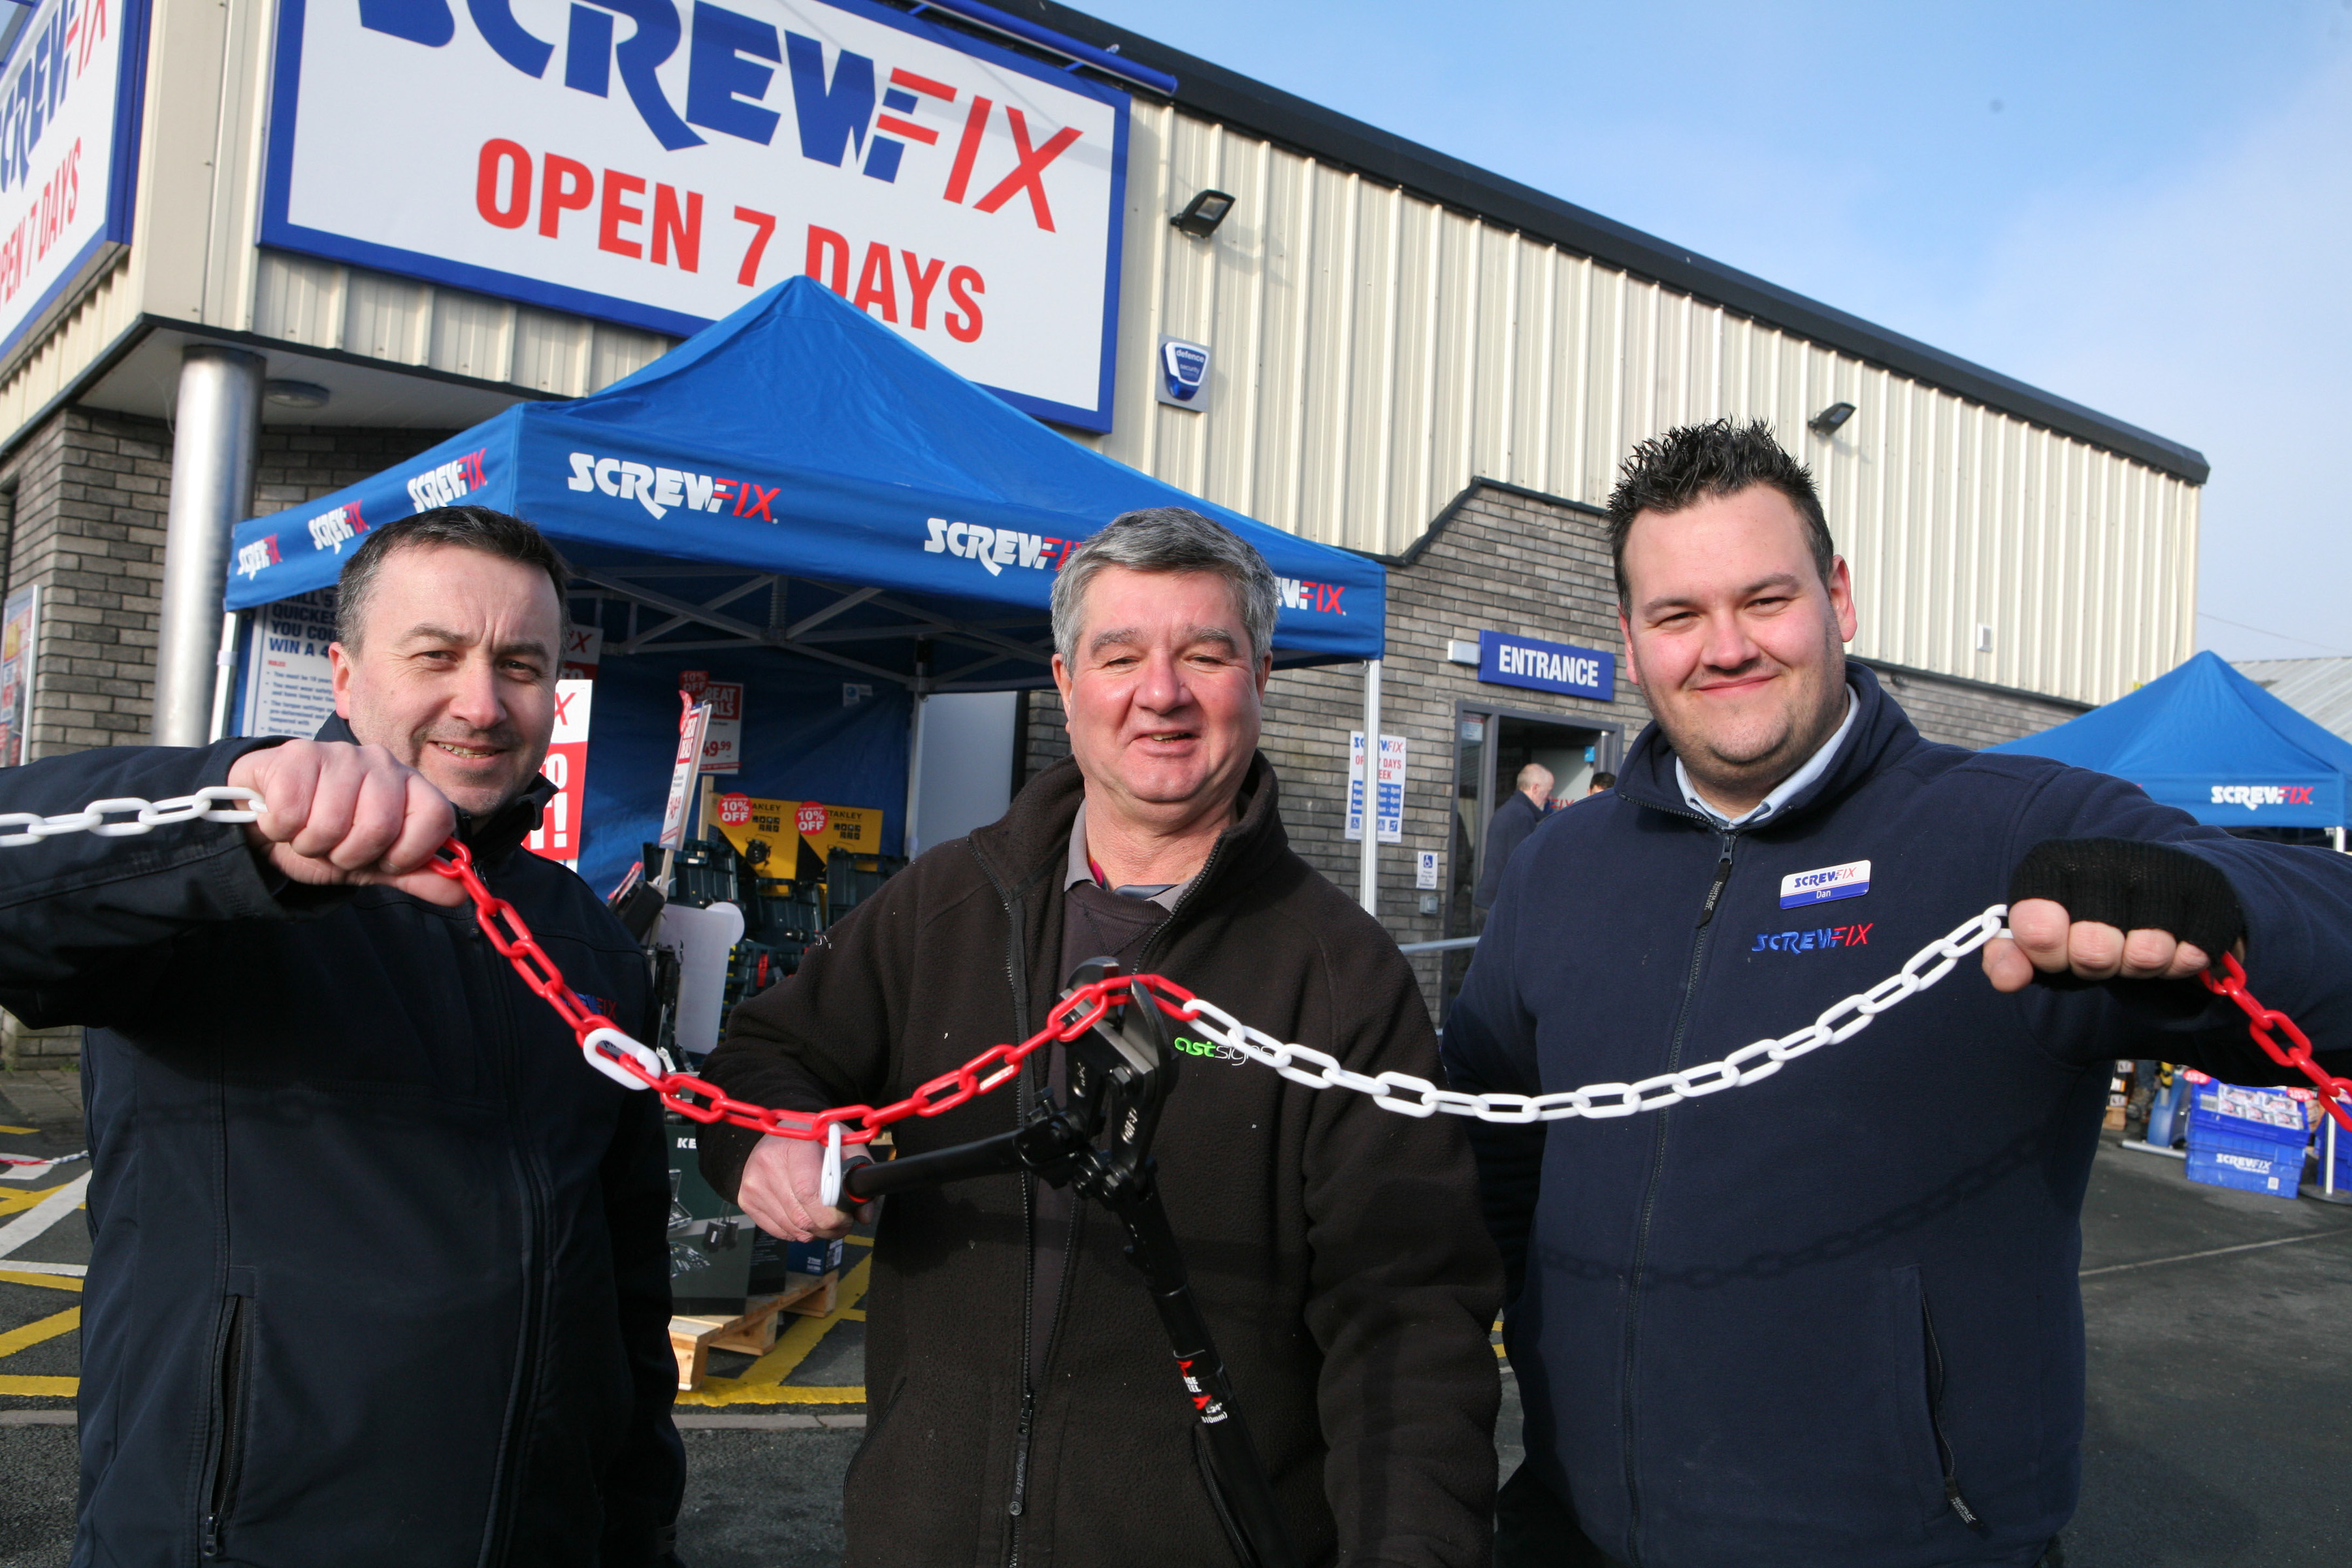 Penrith first Screwfix store is declared a runaway success